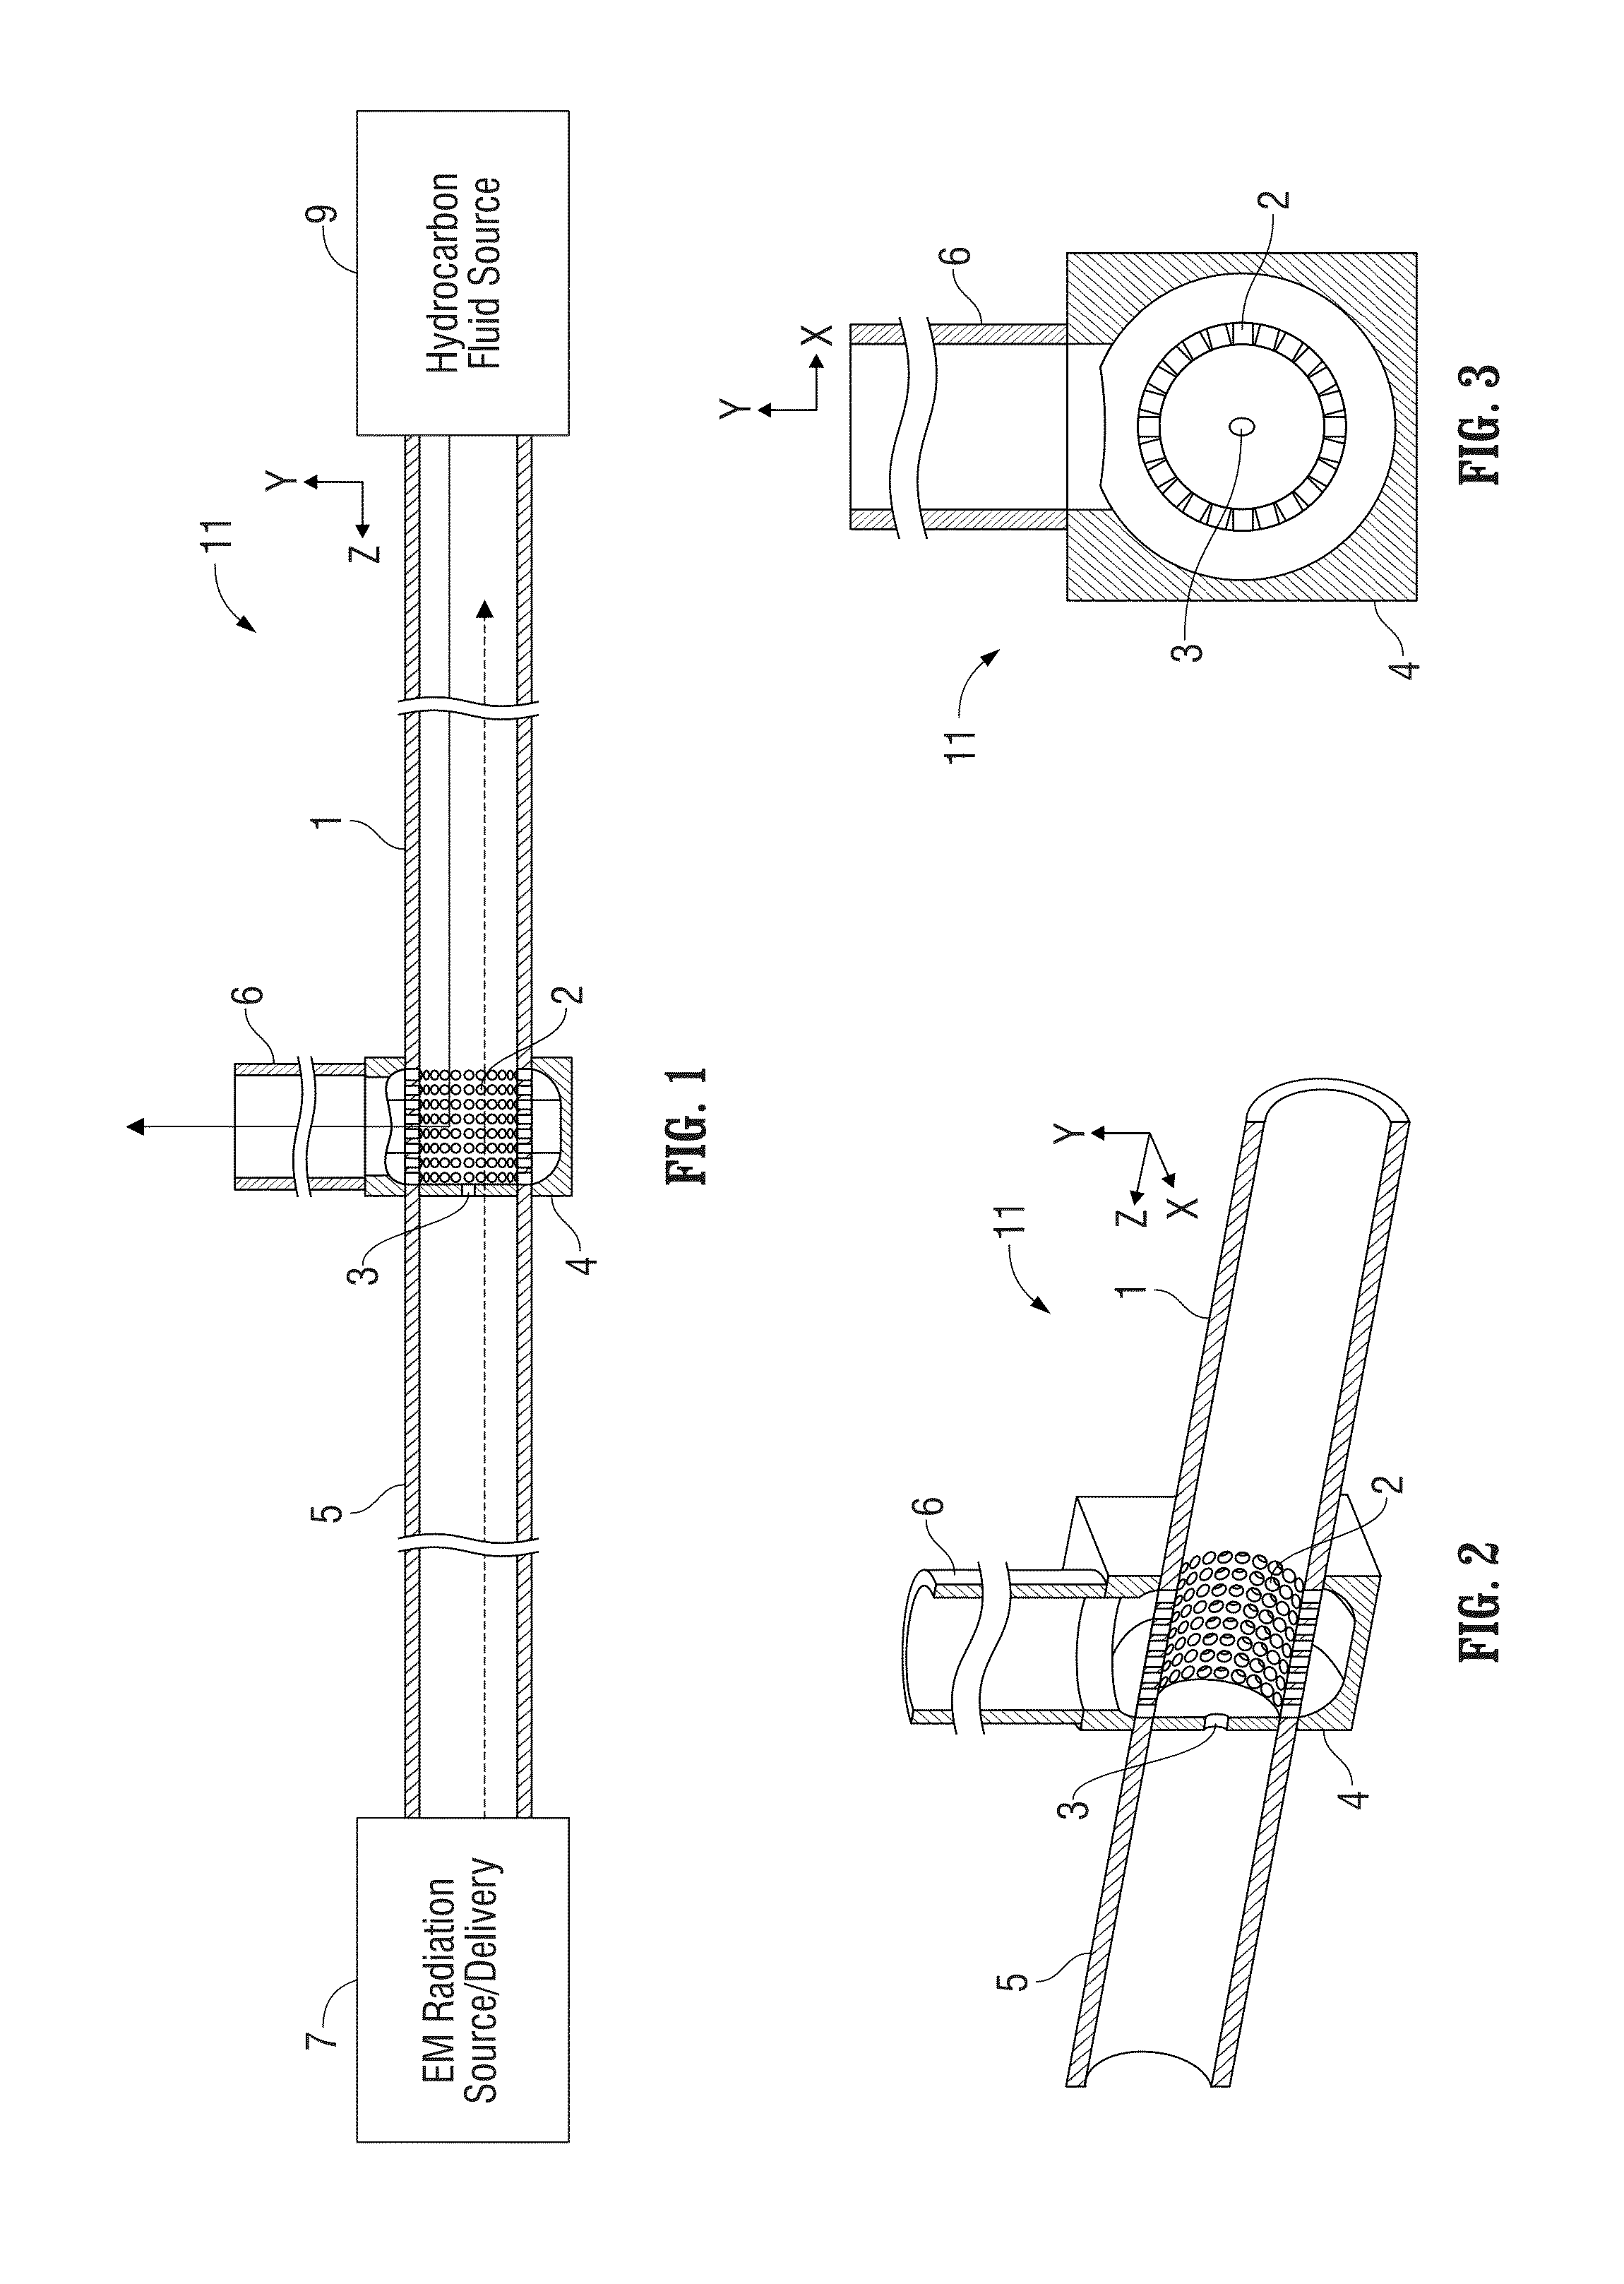 Apparatus and method employing microwave heating of hydrocarbon fluid